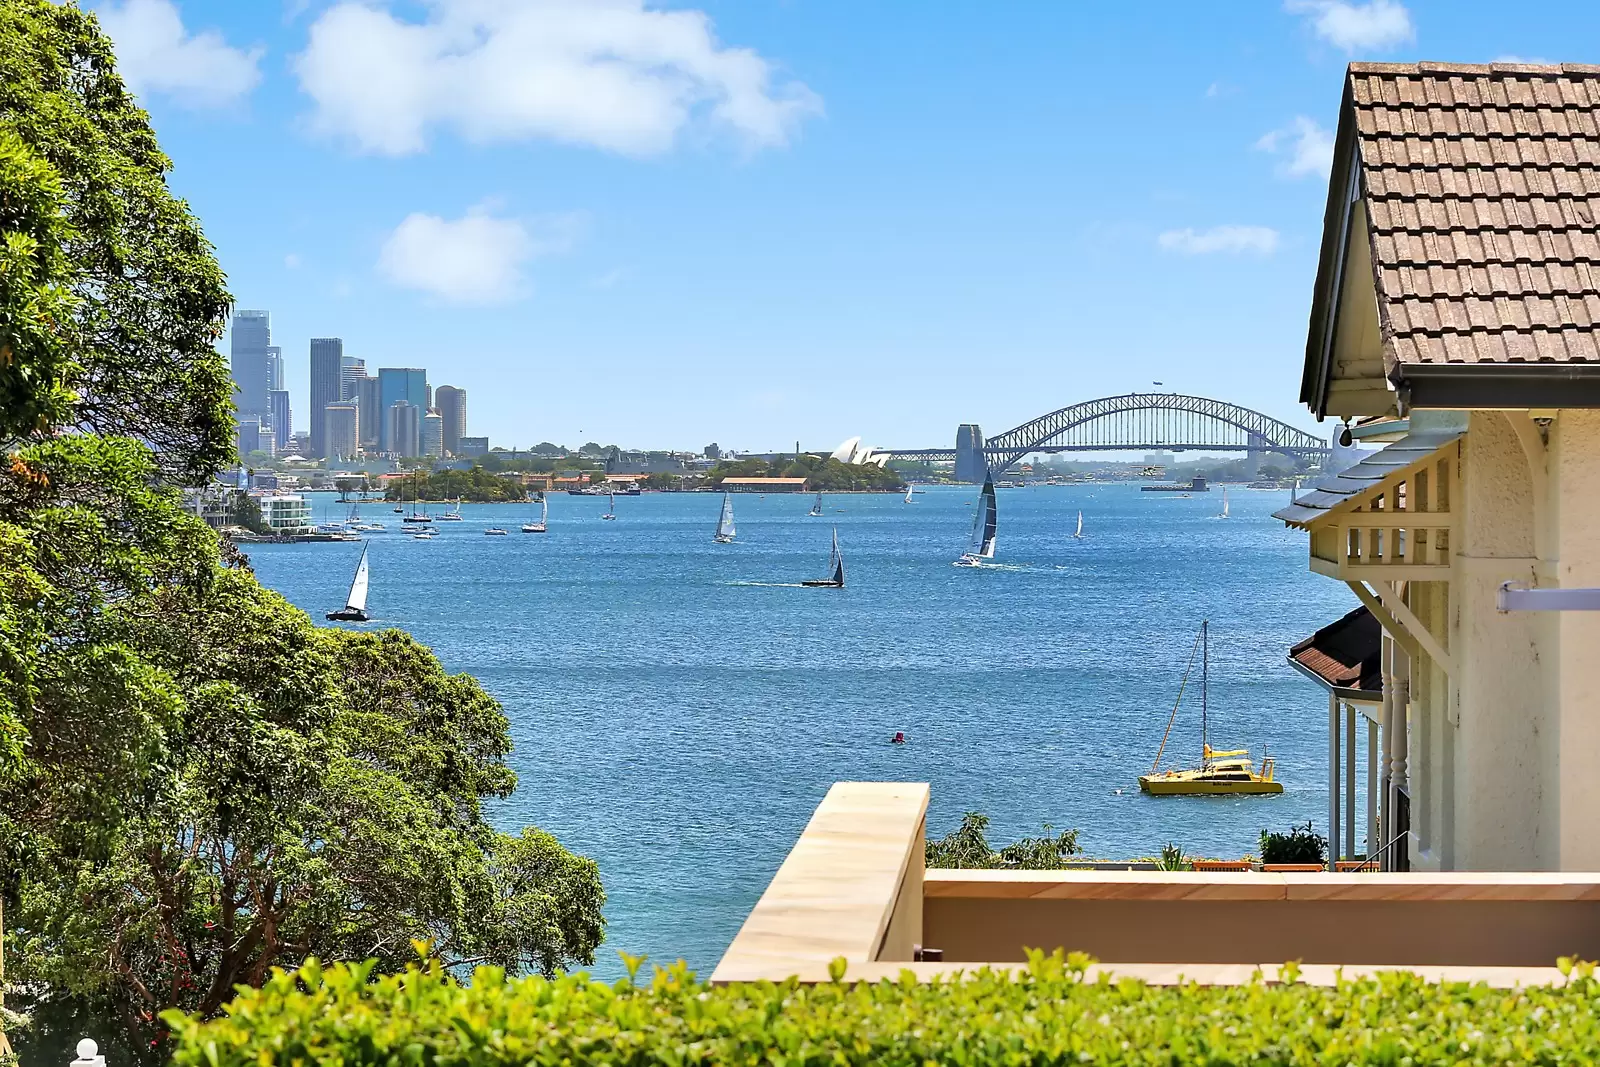 Photo #10: 9 Bayview Hill Road, Rose Bay - Sold by Sydney Sotheby's International Realty